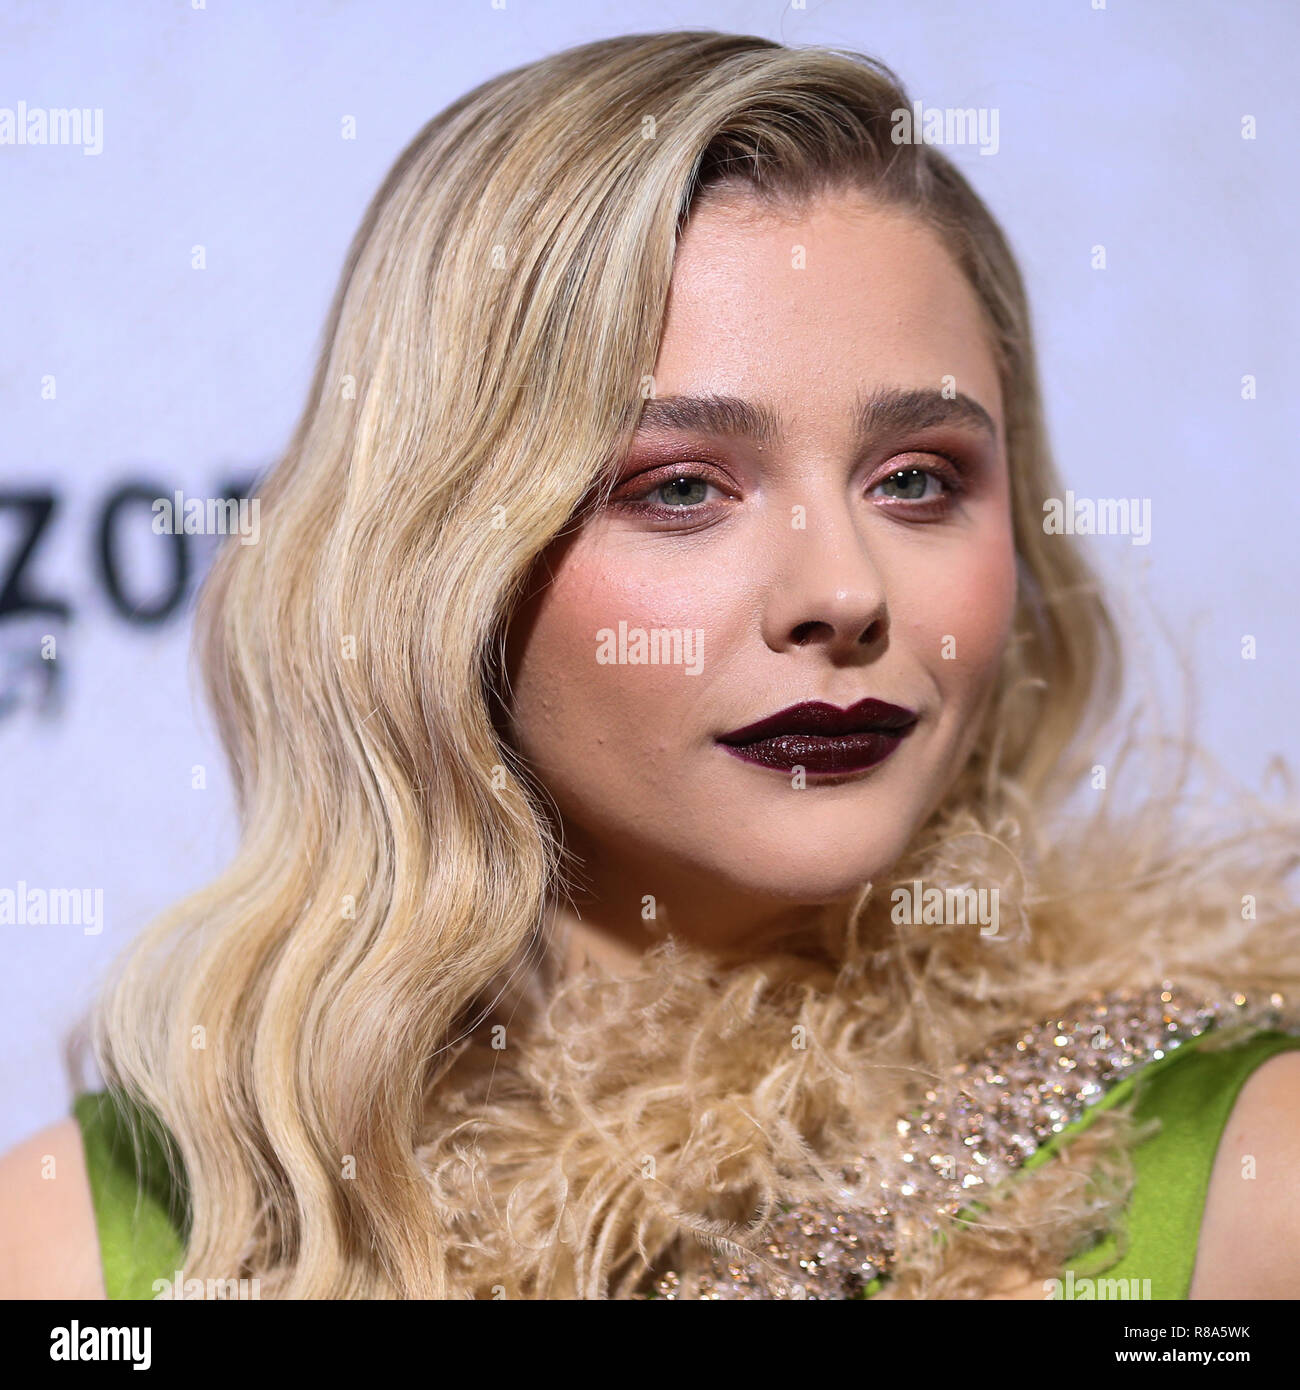 HOLLYWOOD, LOS ANGELES, CA, USA - OCTOBER 24: Actress Chloe Grace Moretz wearing a Miu Miu dress arrives at the Los Angeles Premiere Of Amazon Studio's 'Suspiria' held at the ArcLight Cinerama Dome on October 24, 2018 in Hollywood, Los Angeles, California, United States. (Photo by Xavier Collin/Image Press Agency) Stock Photo